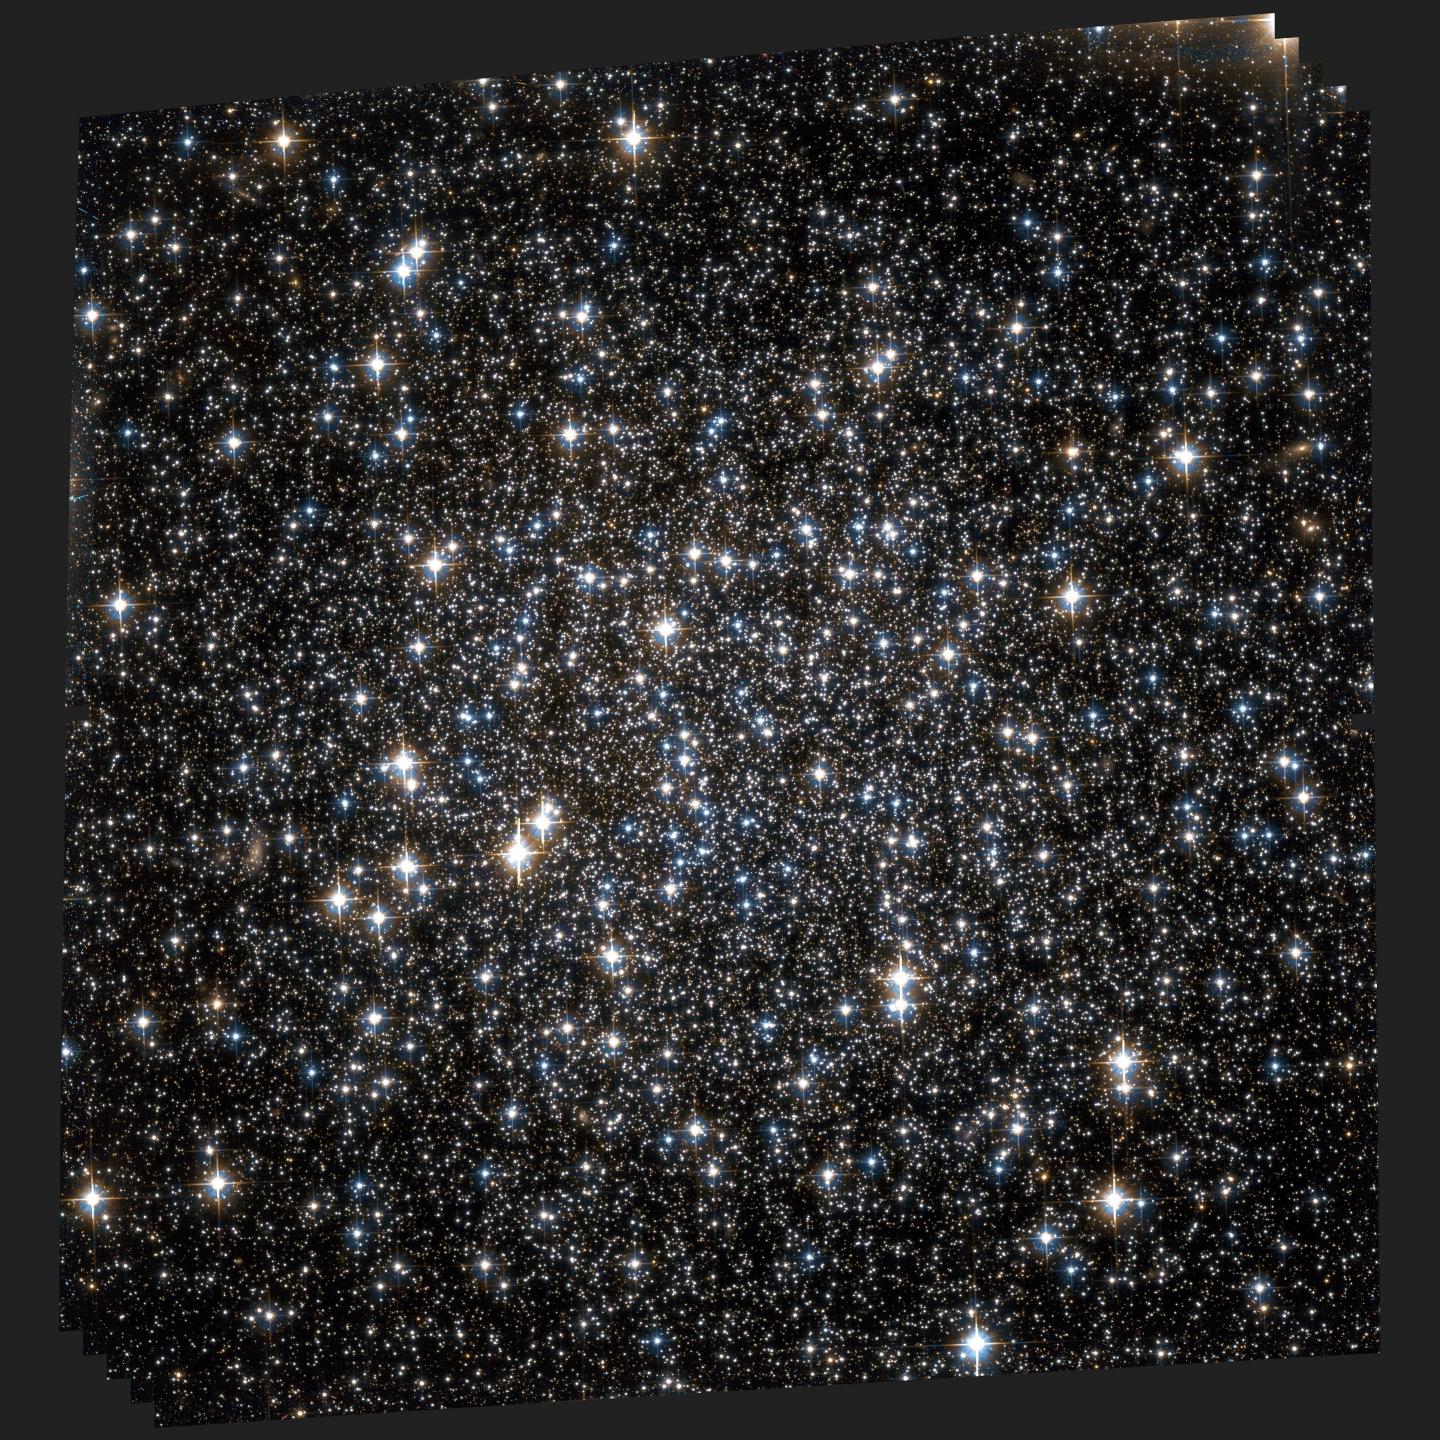 Hubbel Observation of NGC6101